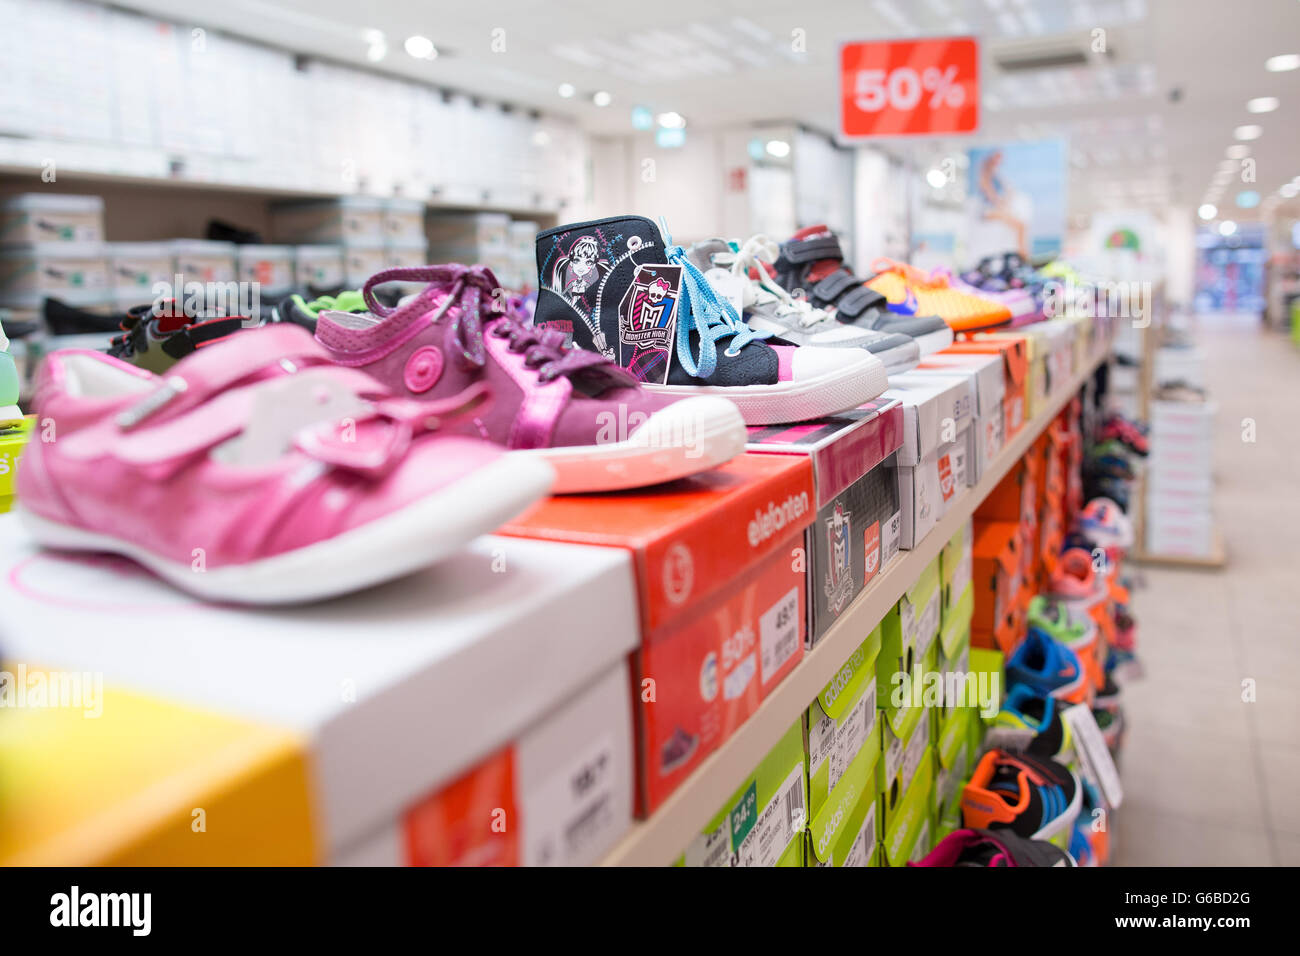 Duesseldorf, Germany. 24th June, 2016. Shoes on sale at a Deichmann store in Duesseldorf, Germany, 24 June 2016. PHOTO: MAJA HITIJ/dpa/Alamy Live News Stock Photo -